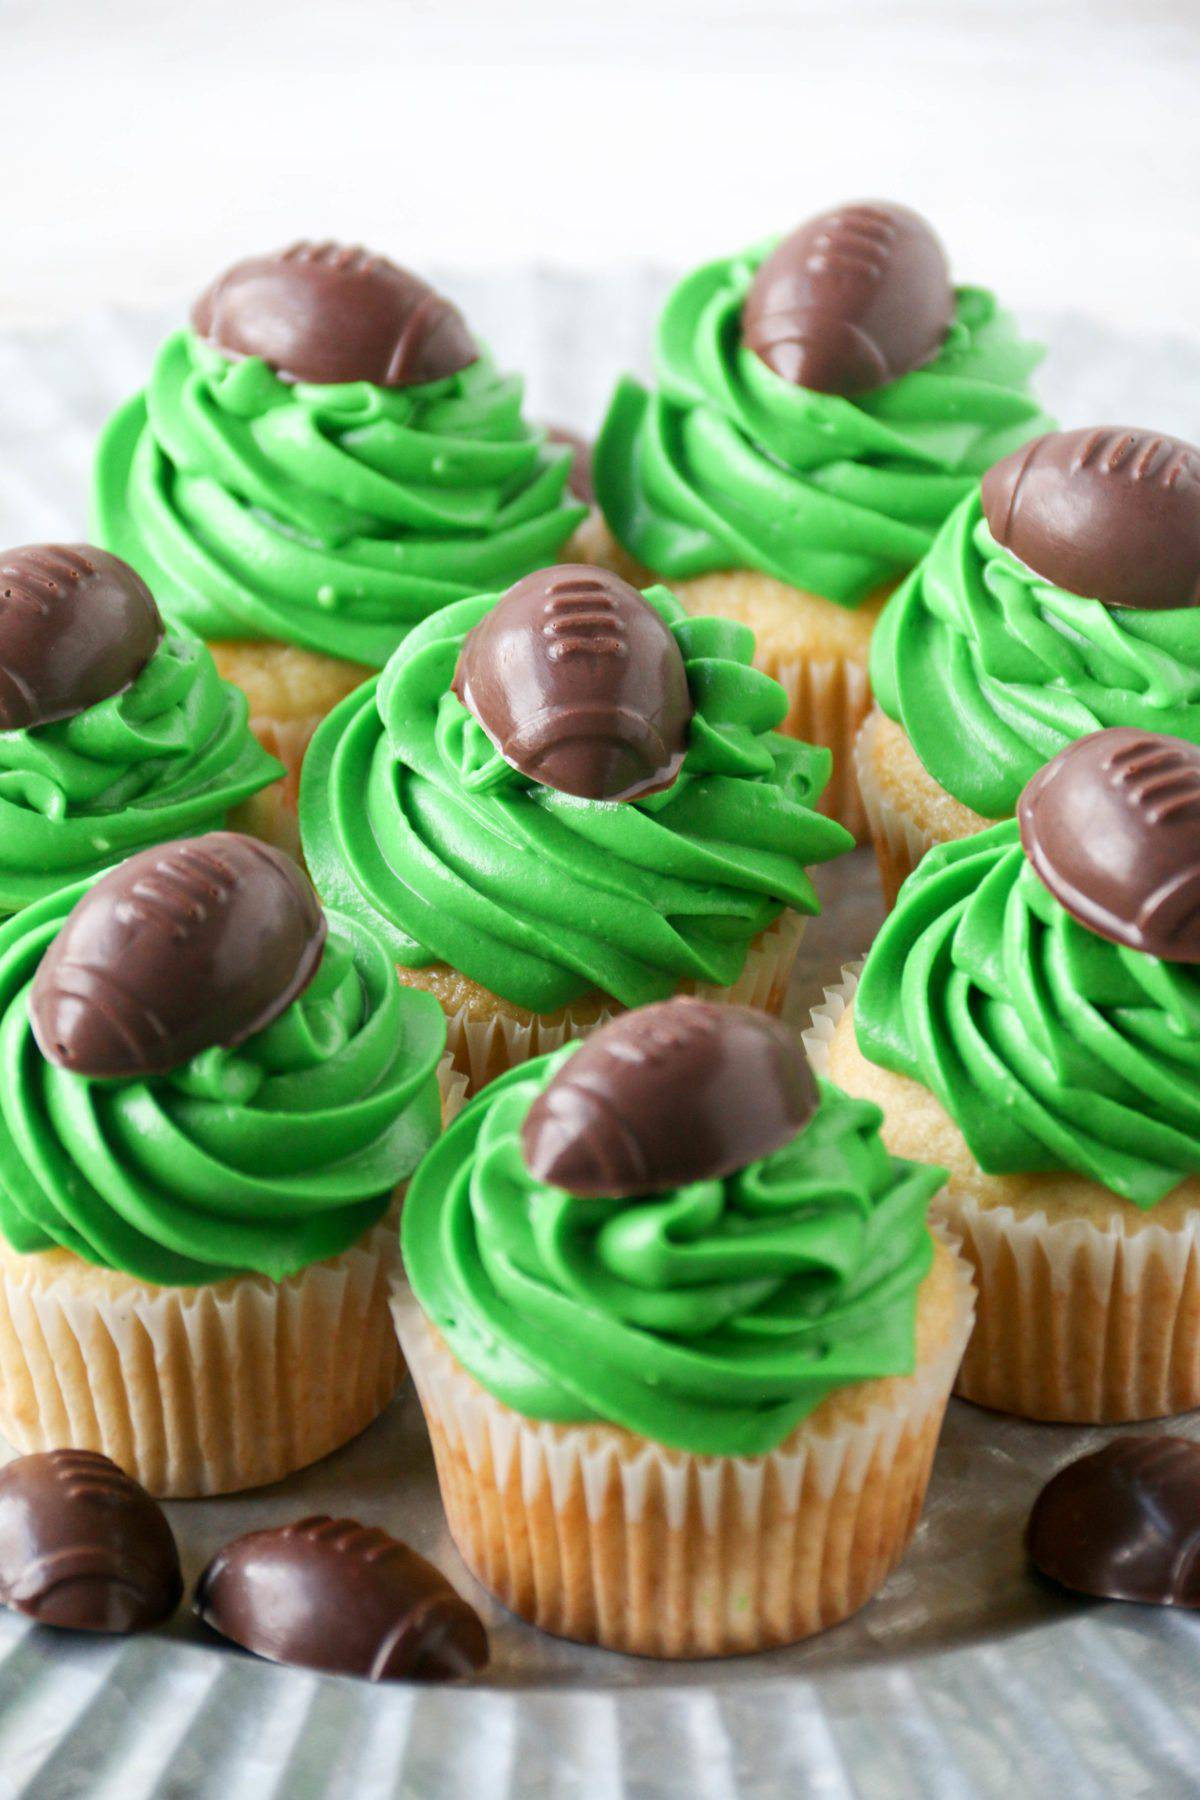 Super Bowl Cupcake Recipes
 Football Cupcakes perfect for the Superbowl Boston